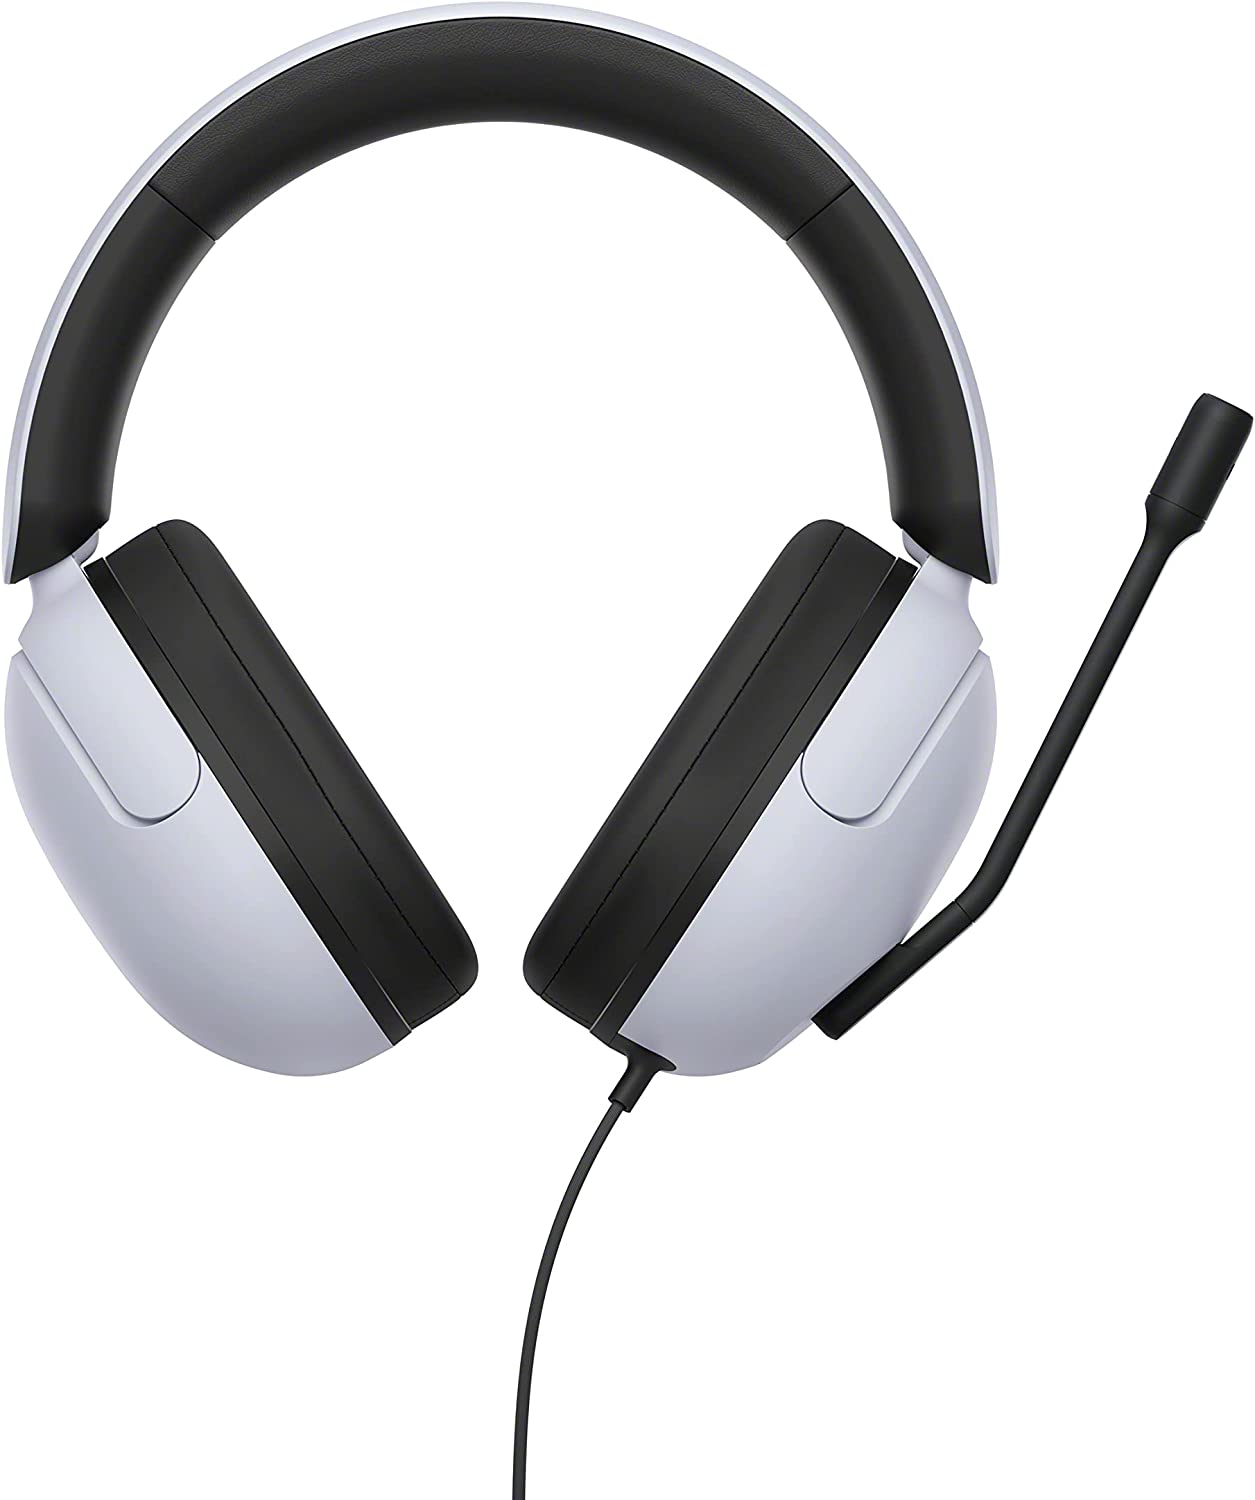 Sony INZONE H3 Wired Gaming Headset, Over-ear Headphones with 360 Spatial Sound, MDR-G300